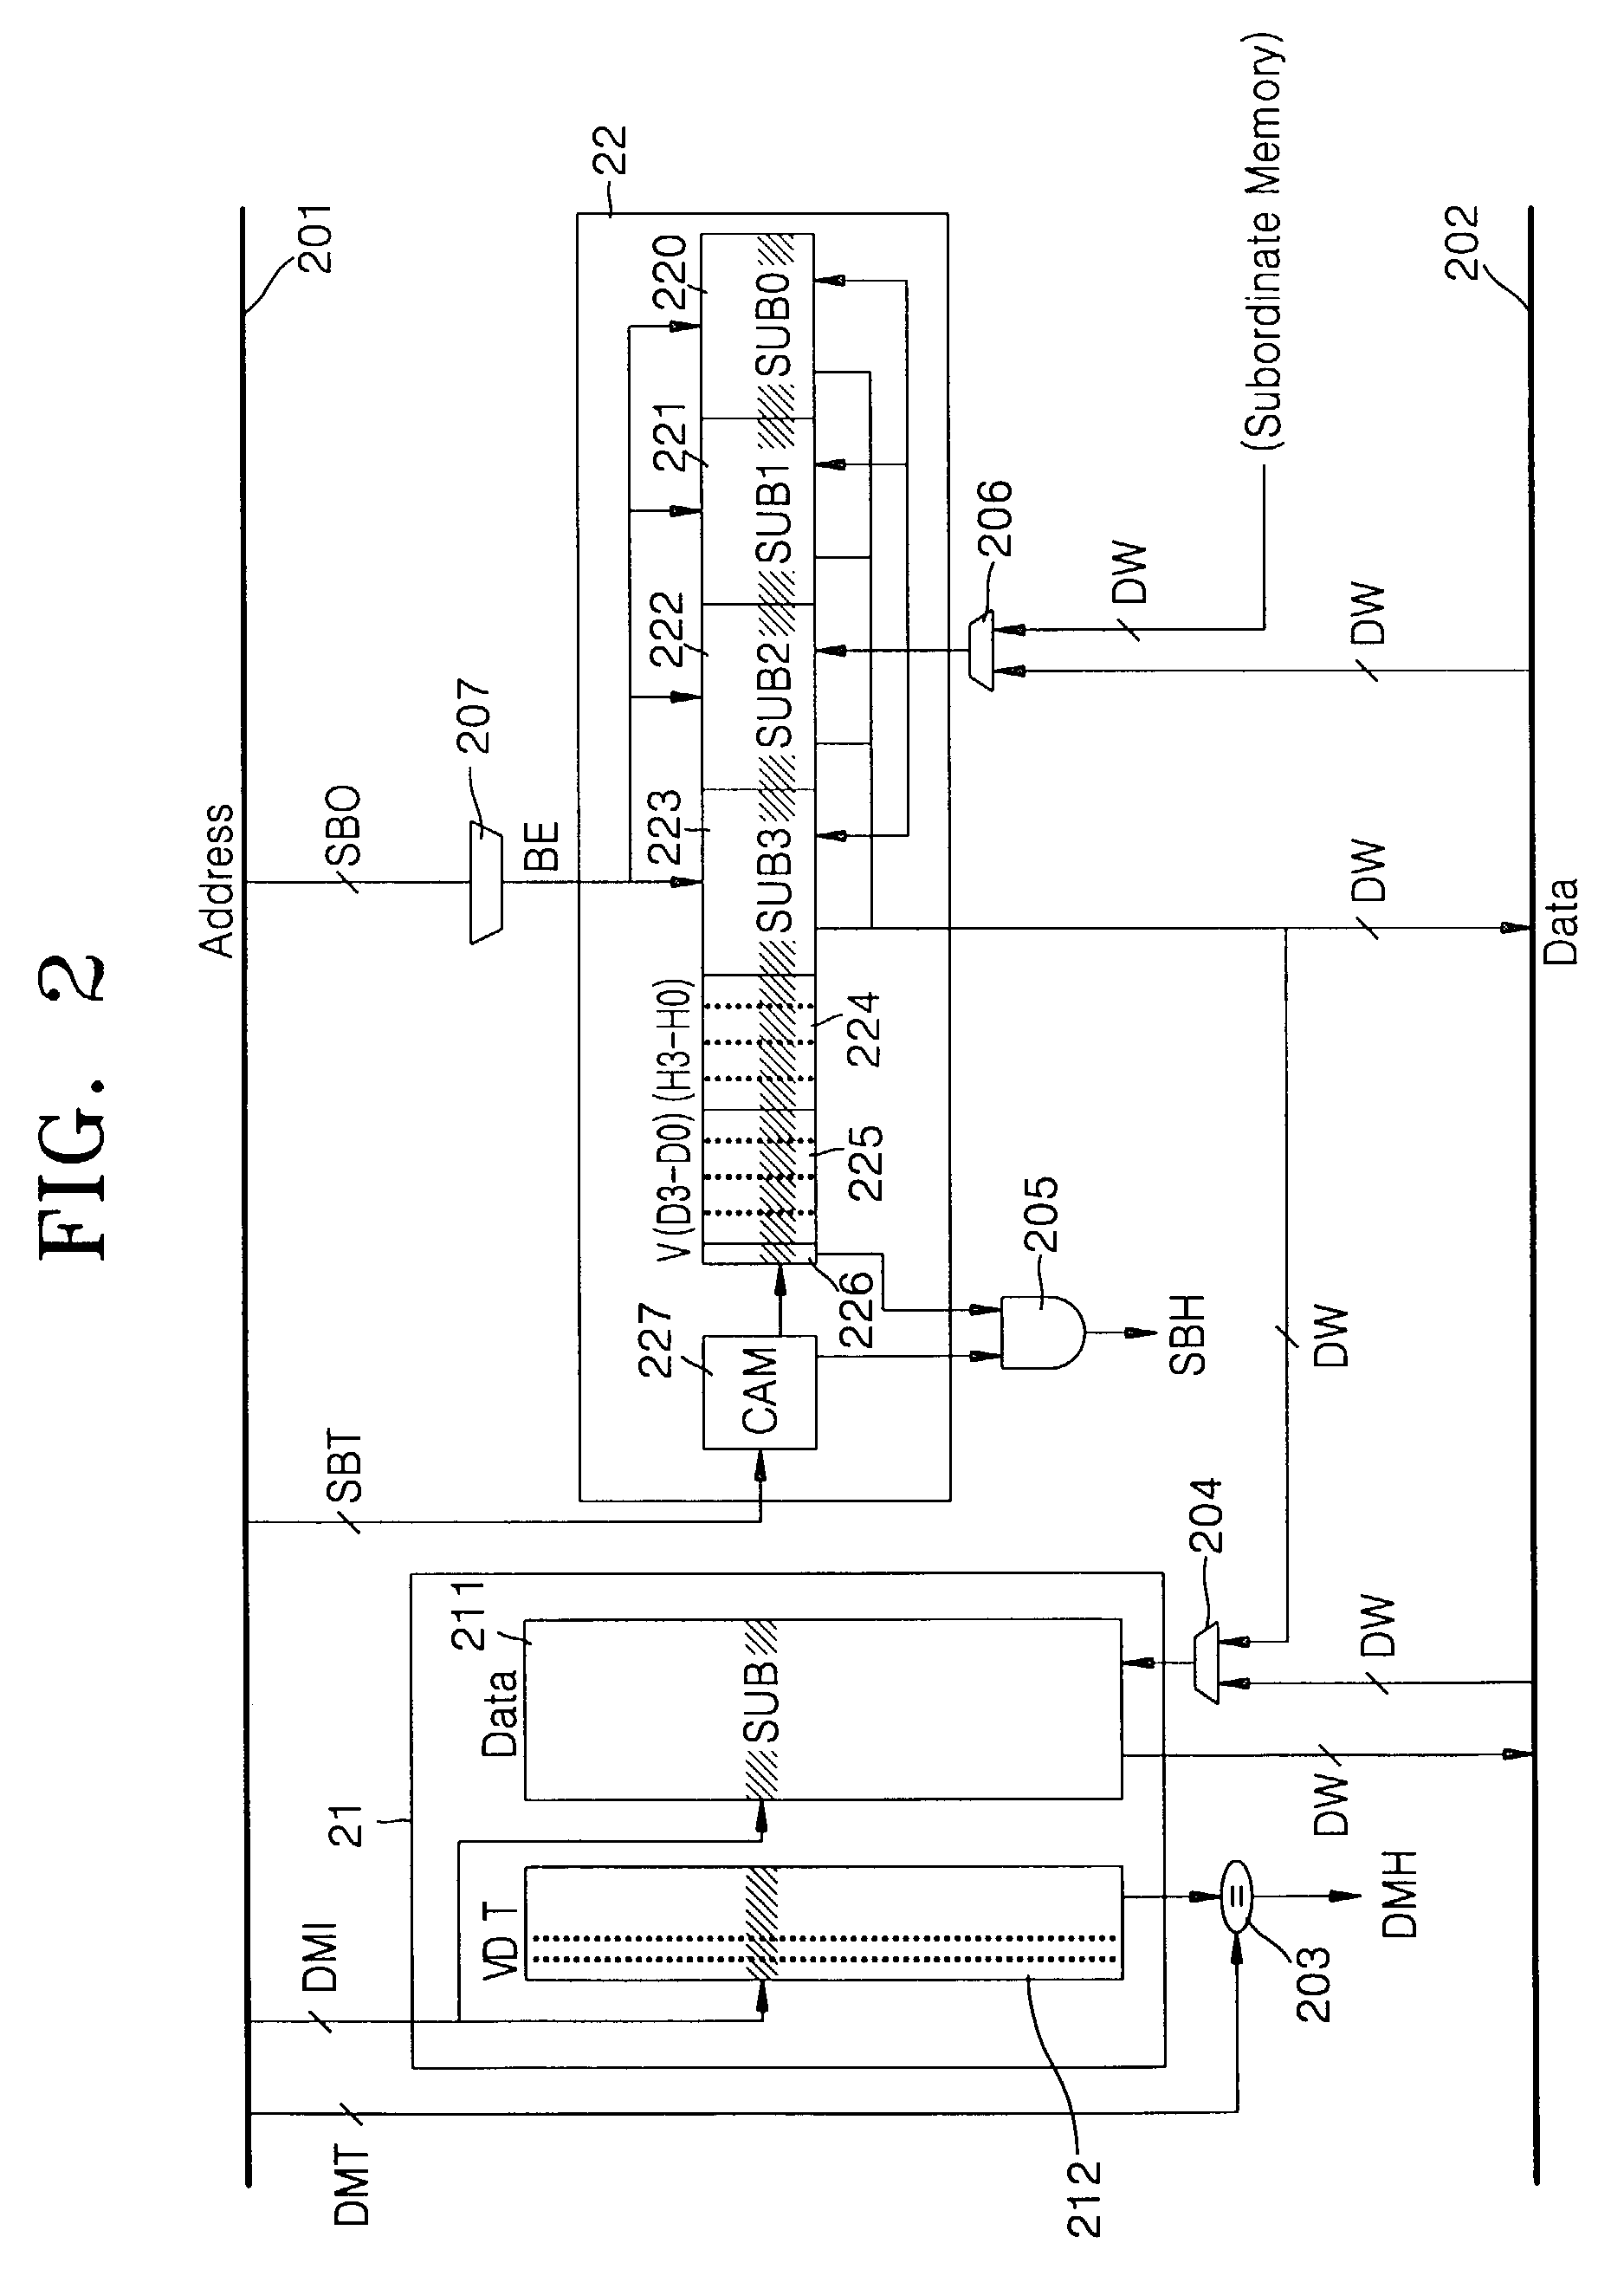 Cache system and method for controlling the cache system comprising direct-mapped cache and fully-associative buffer